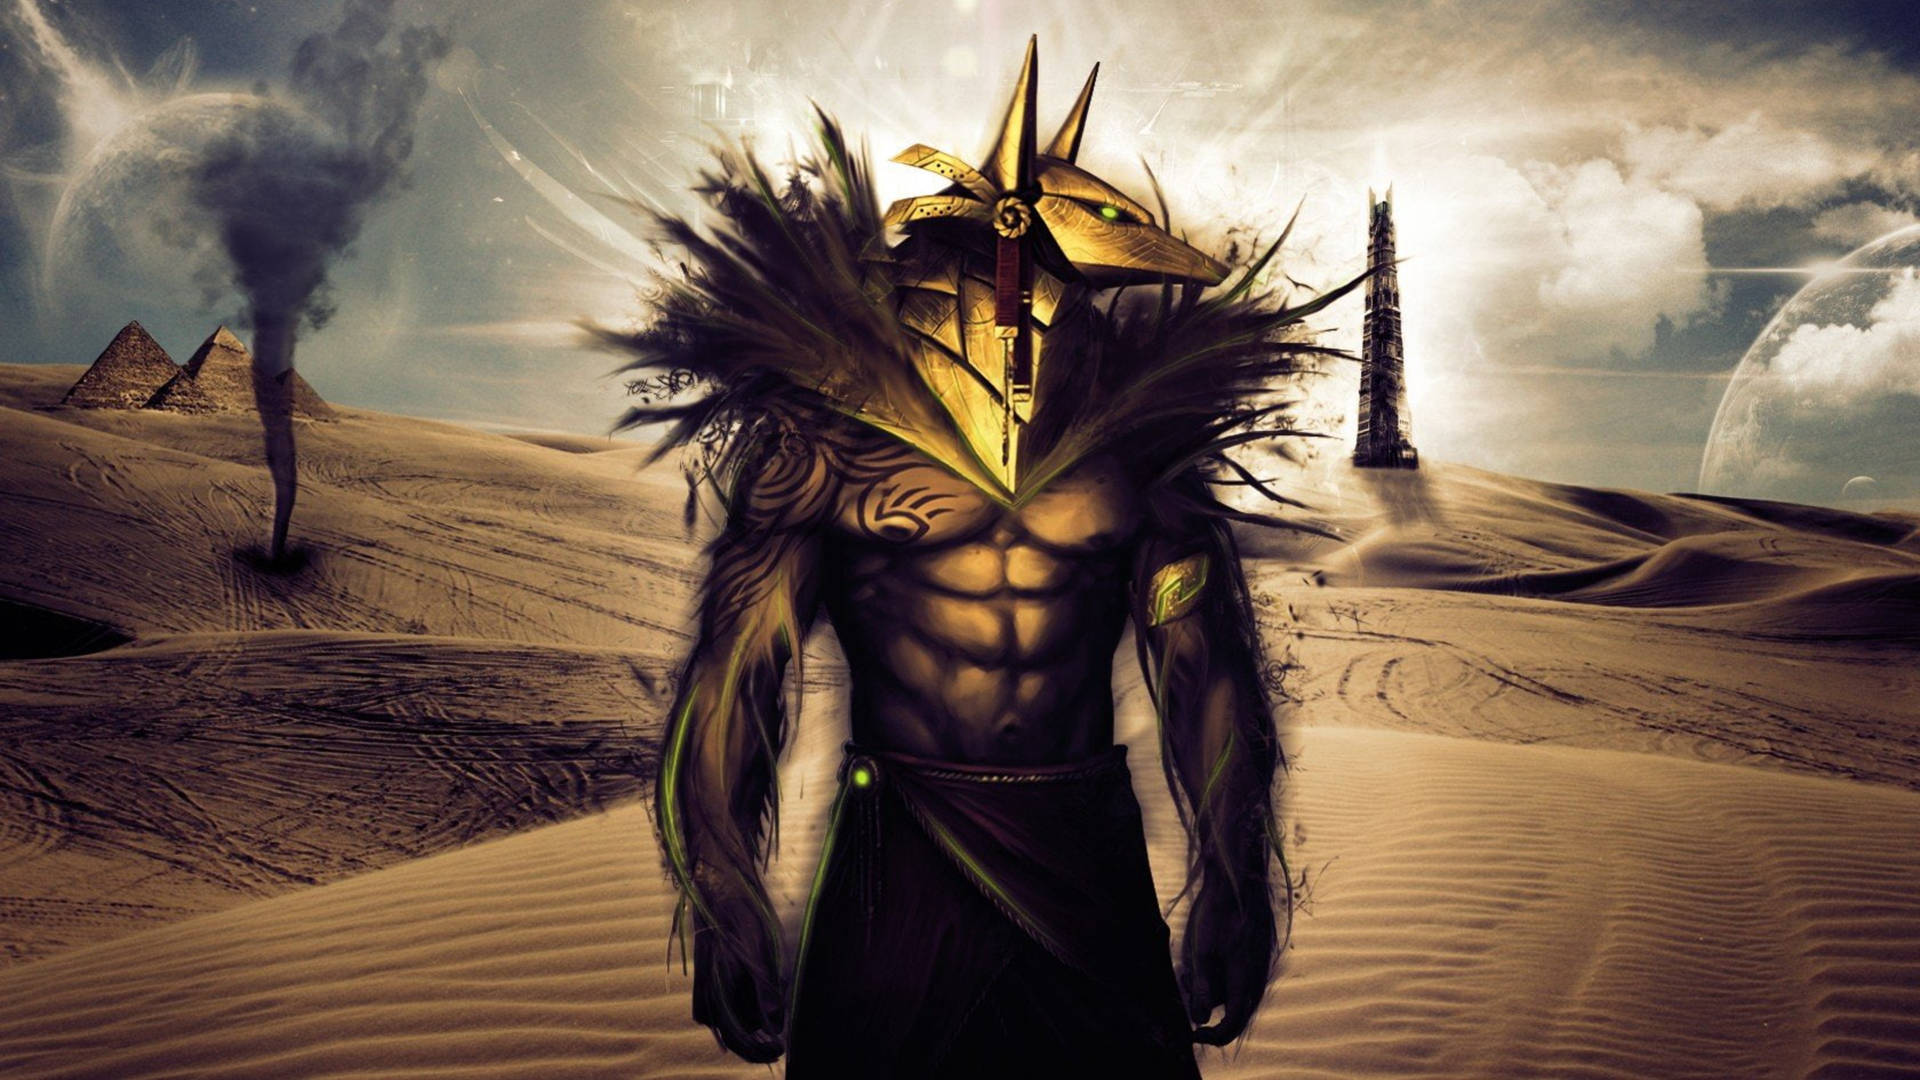 Caption: The Majestic Anubis Overlooking the Egyptian Desert Wallpaper